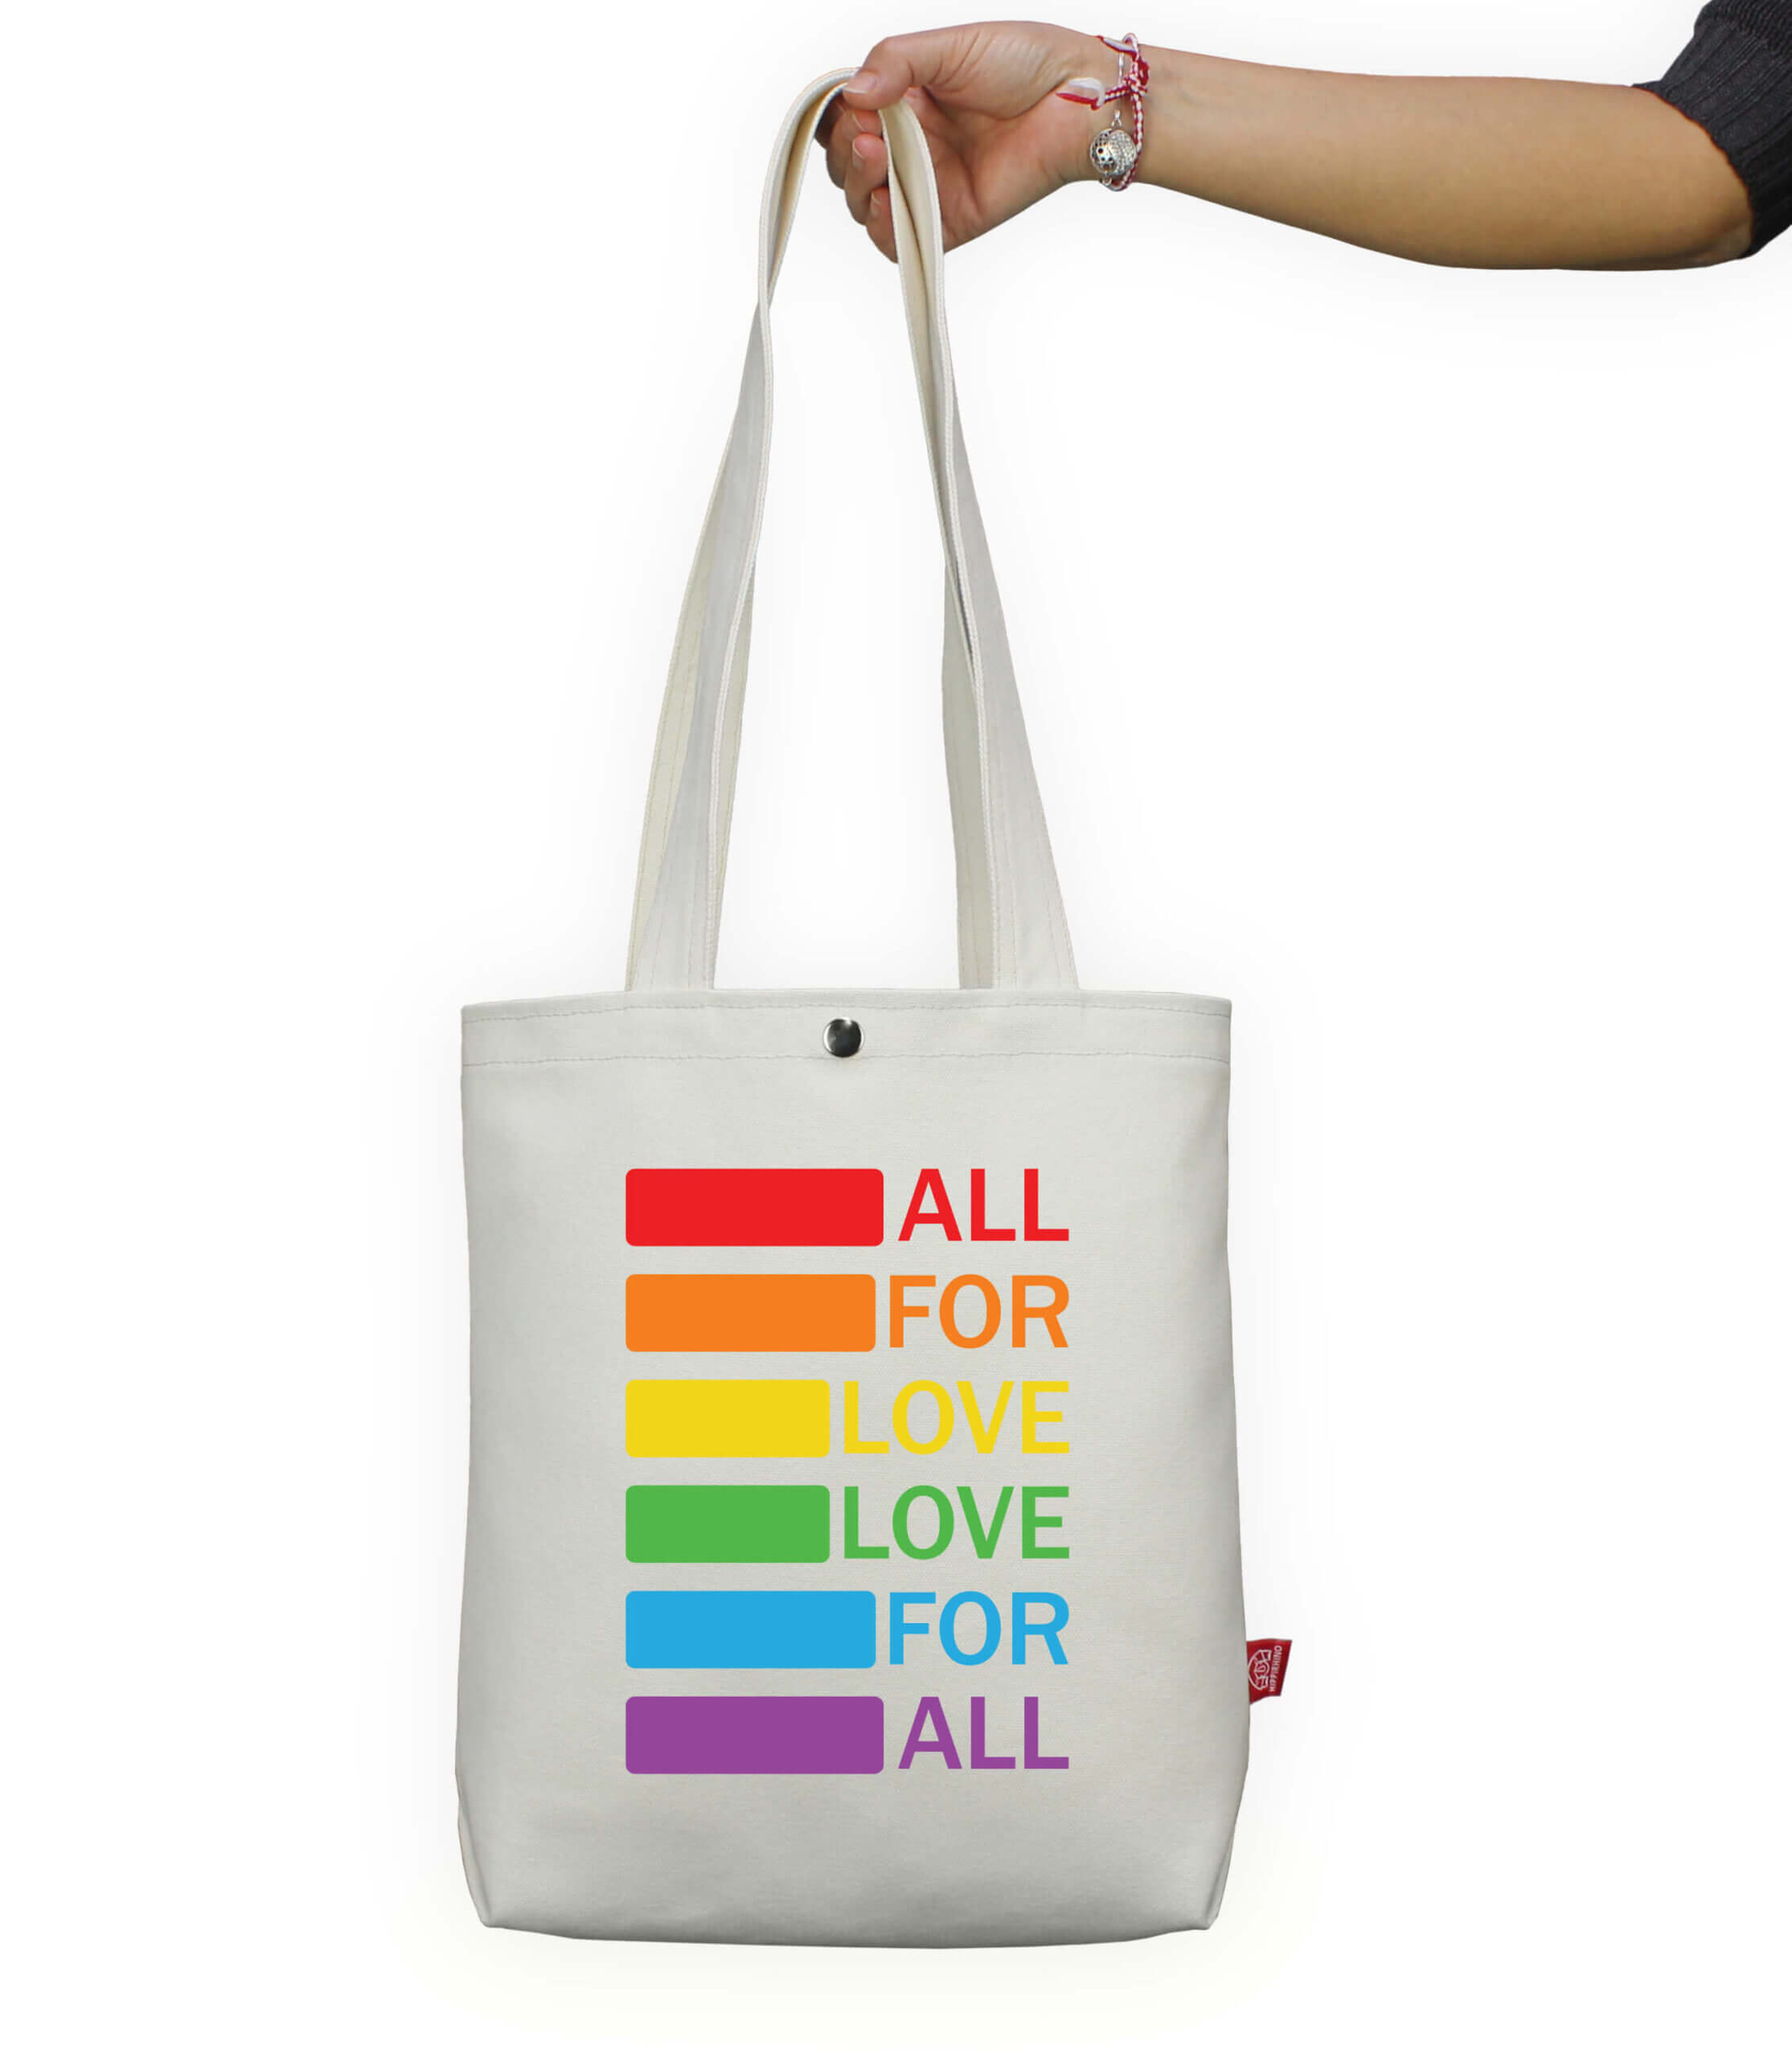 fresigner fashion Tote bag undefined Tote bag Star shape LGBT rainbow pride  flag Picnic Bags for Women Embroidered Canva